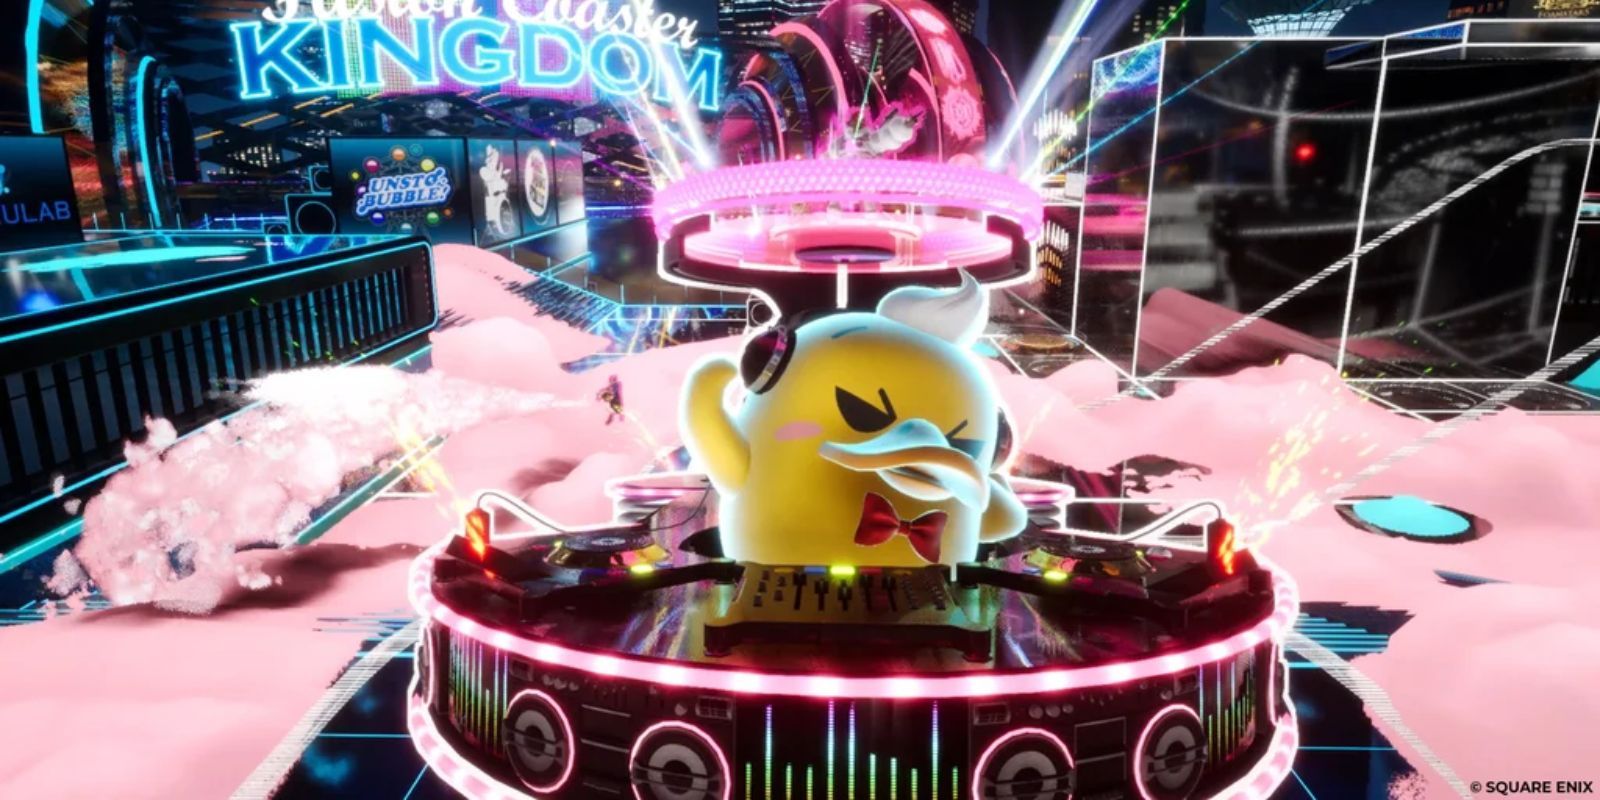 Foamstars game Rubber Duck Party featuring an image of a large yellow duck in a dj booth surrounded by pink foam